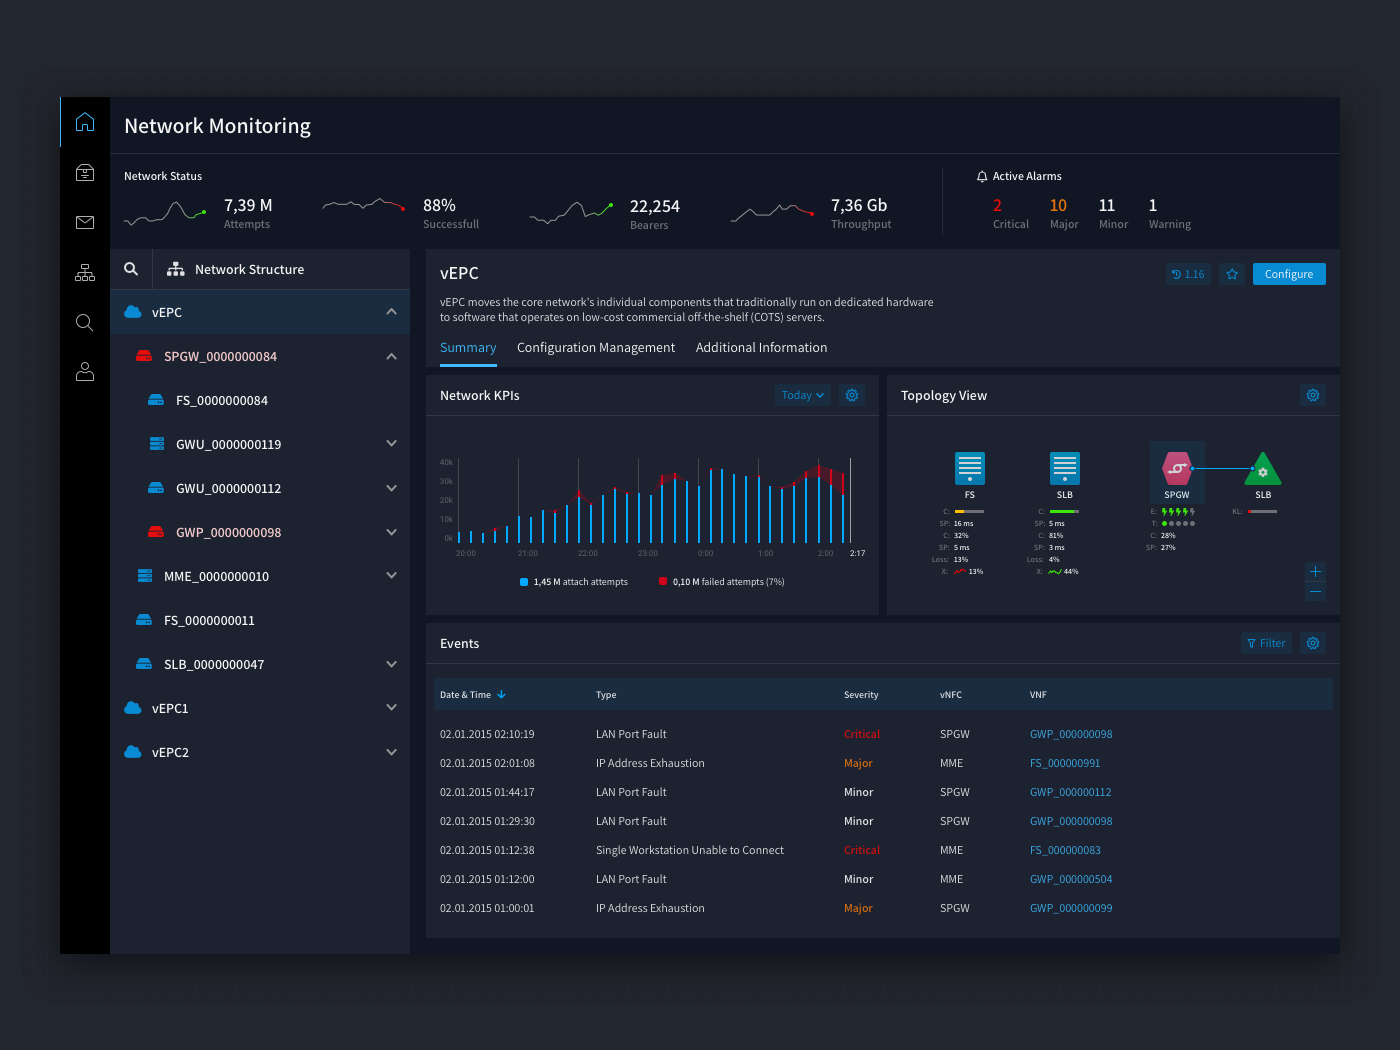 Network monitoring dashboard by Petr Andrianov on Dribbble